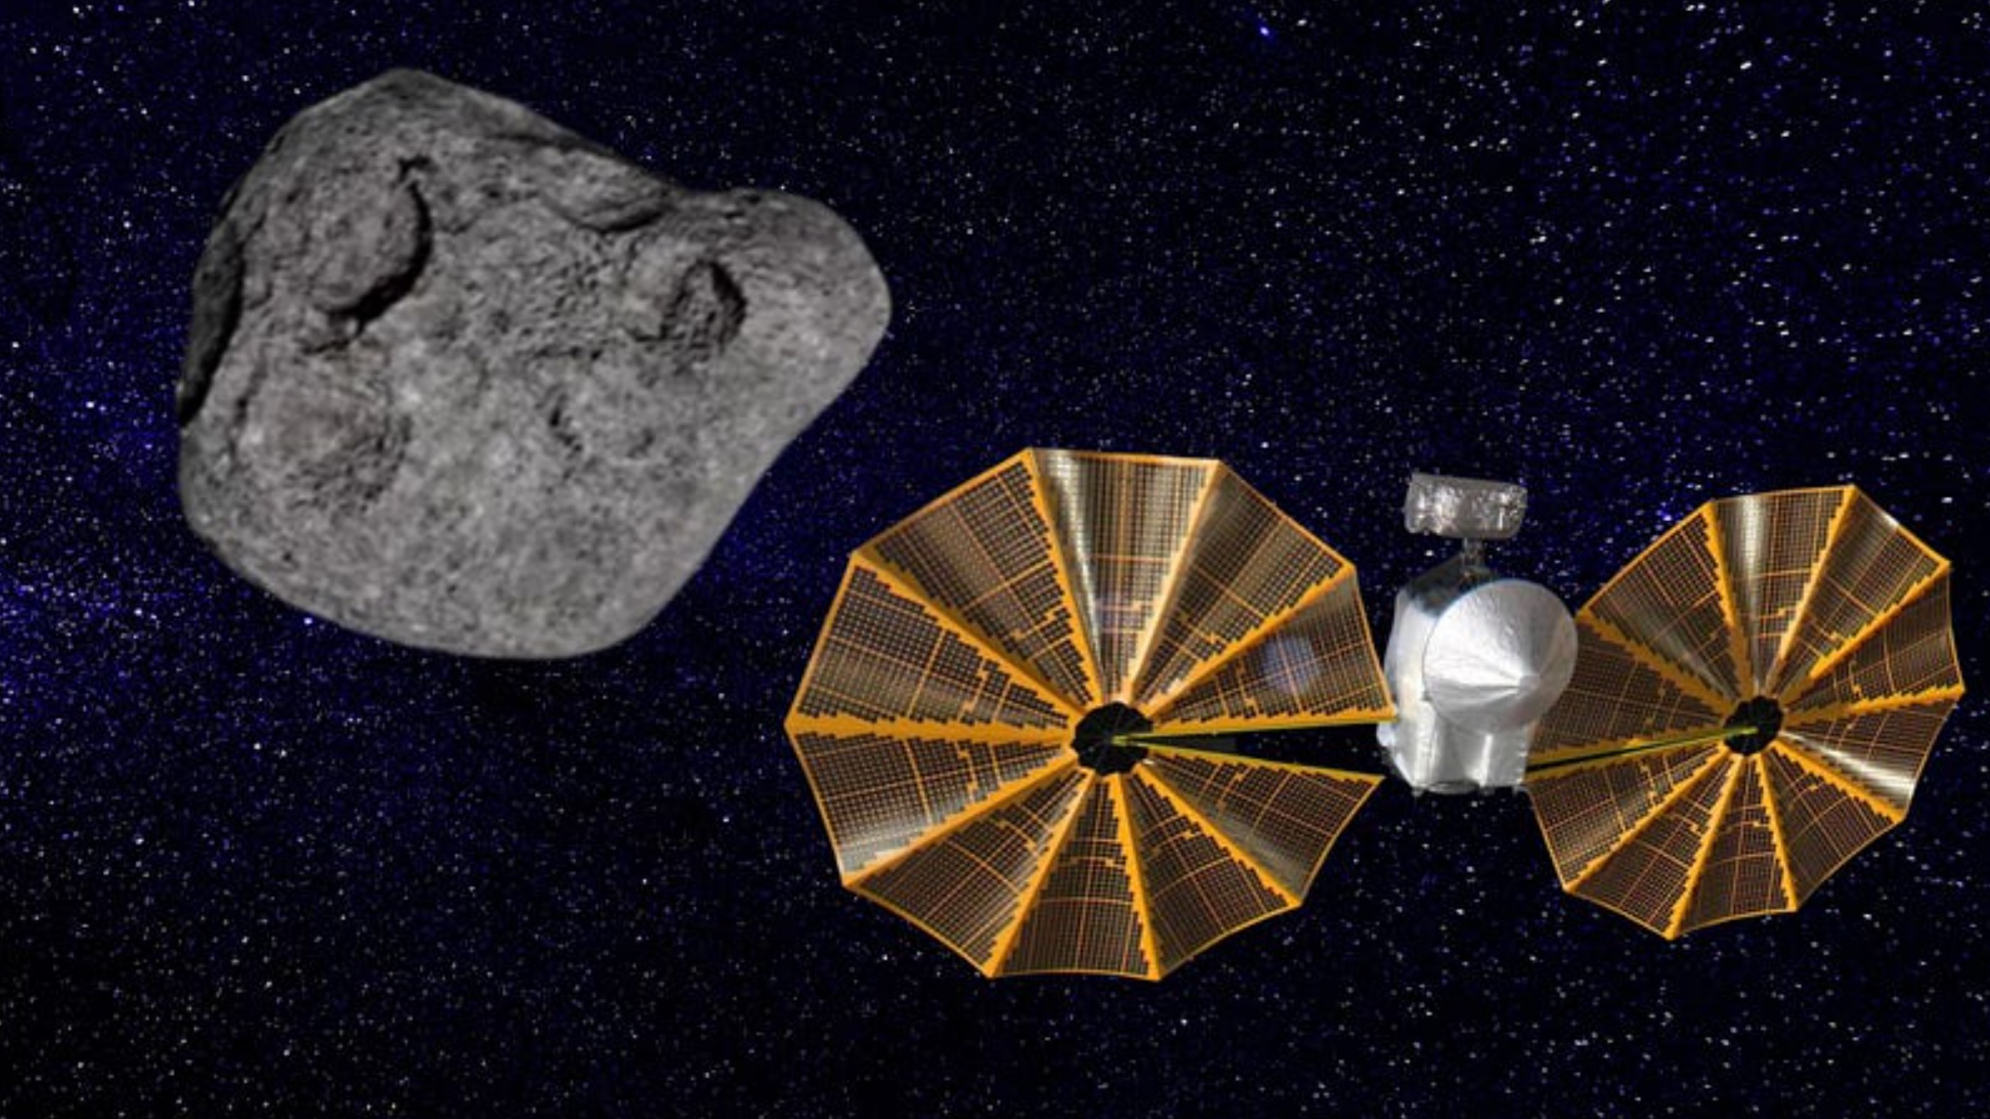 An illustration of NASA's Lucy spacecraft approaching the asteroid Dinkinesh.